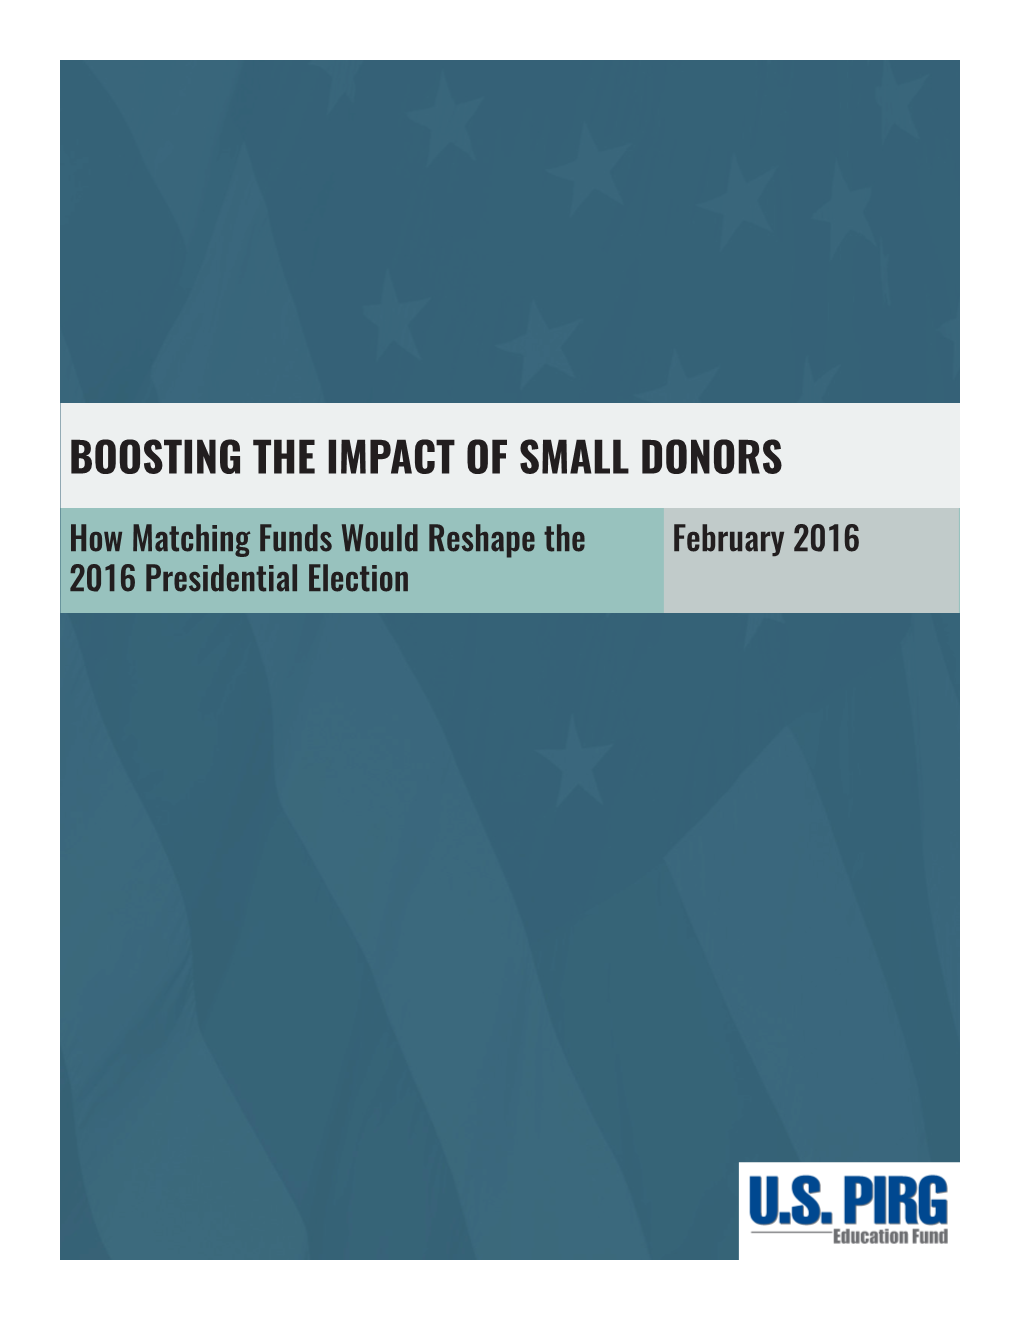 Boosting the Impact of Small Donors